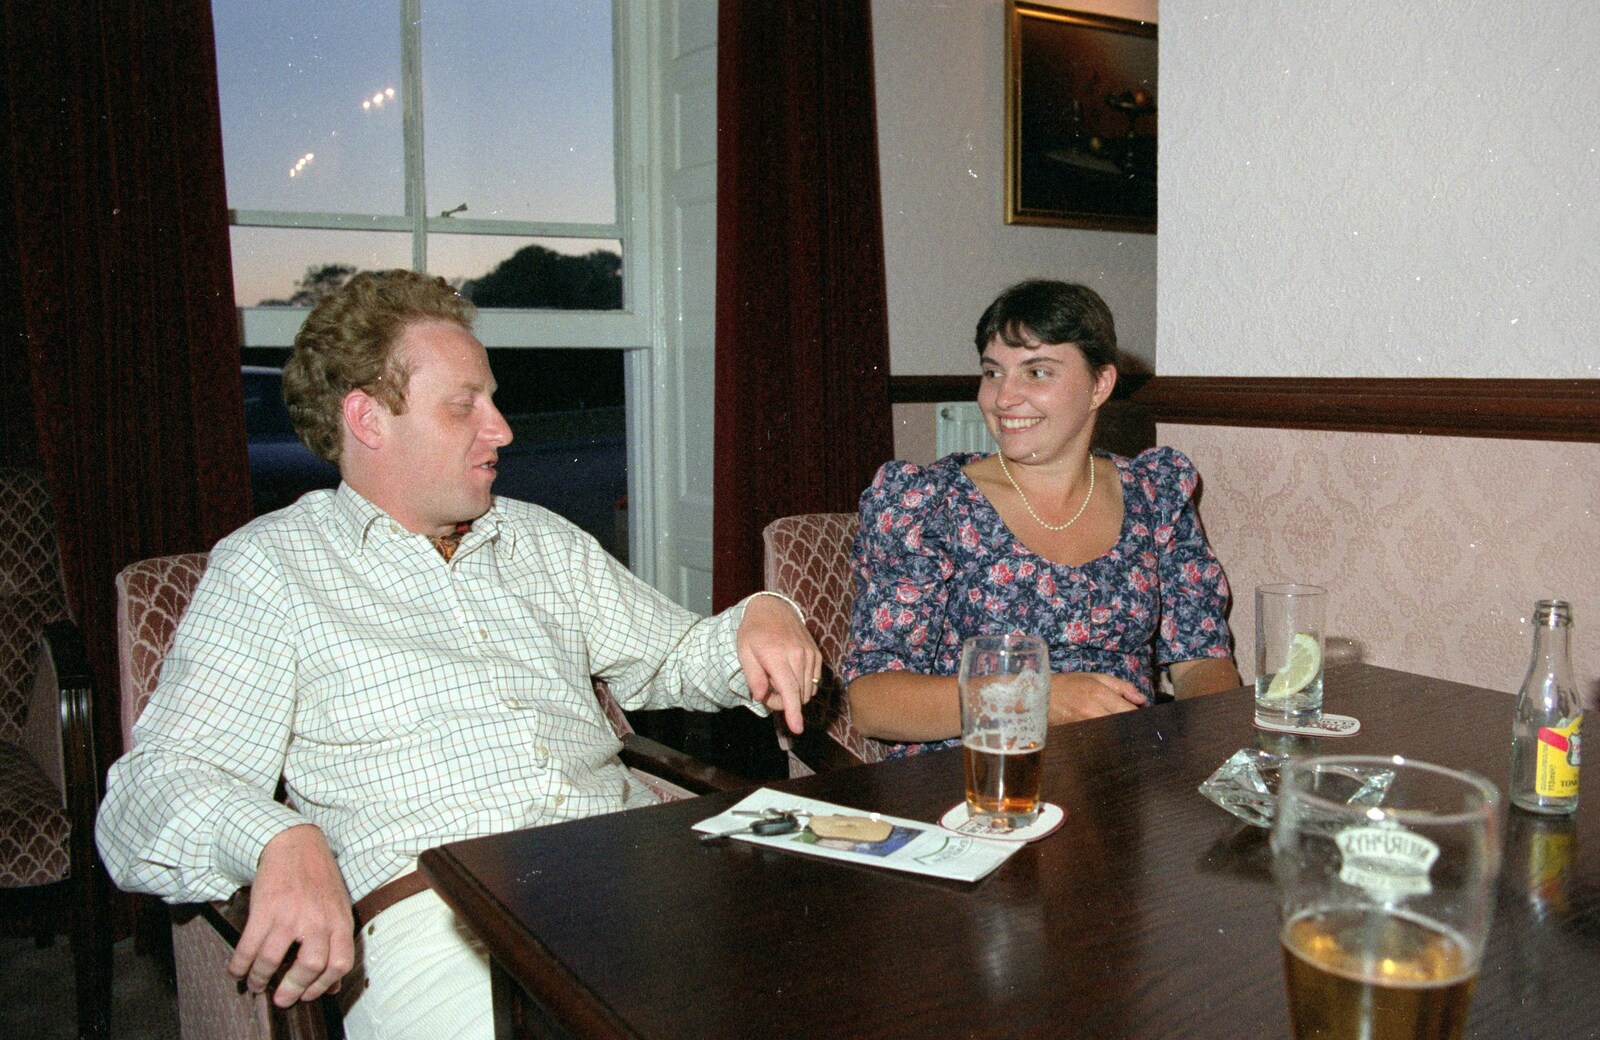 Uni: Country Clubs, On The Beach and Organs, Plymouth - 28th May 1989: Andrew makes a point